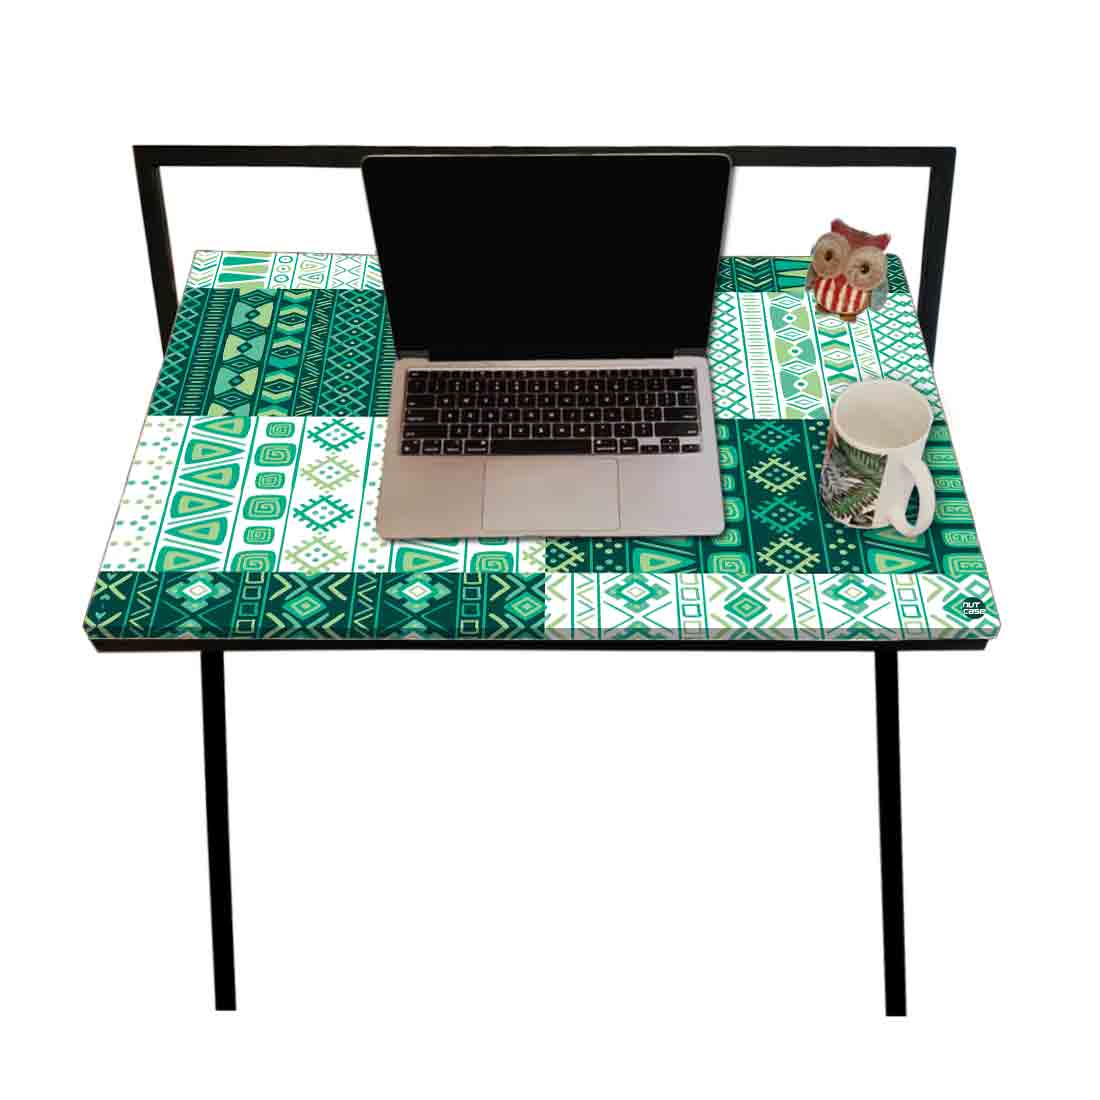 Foldable Small Study Table for WFH Desk - Colorful Nutcase